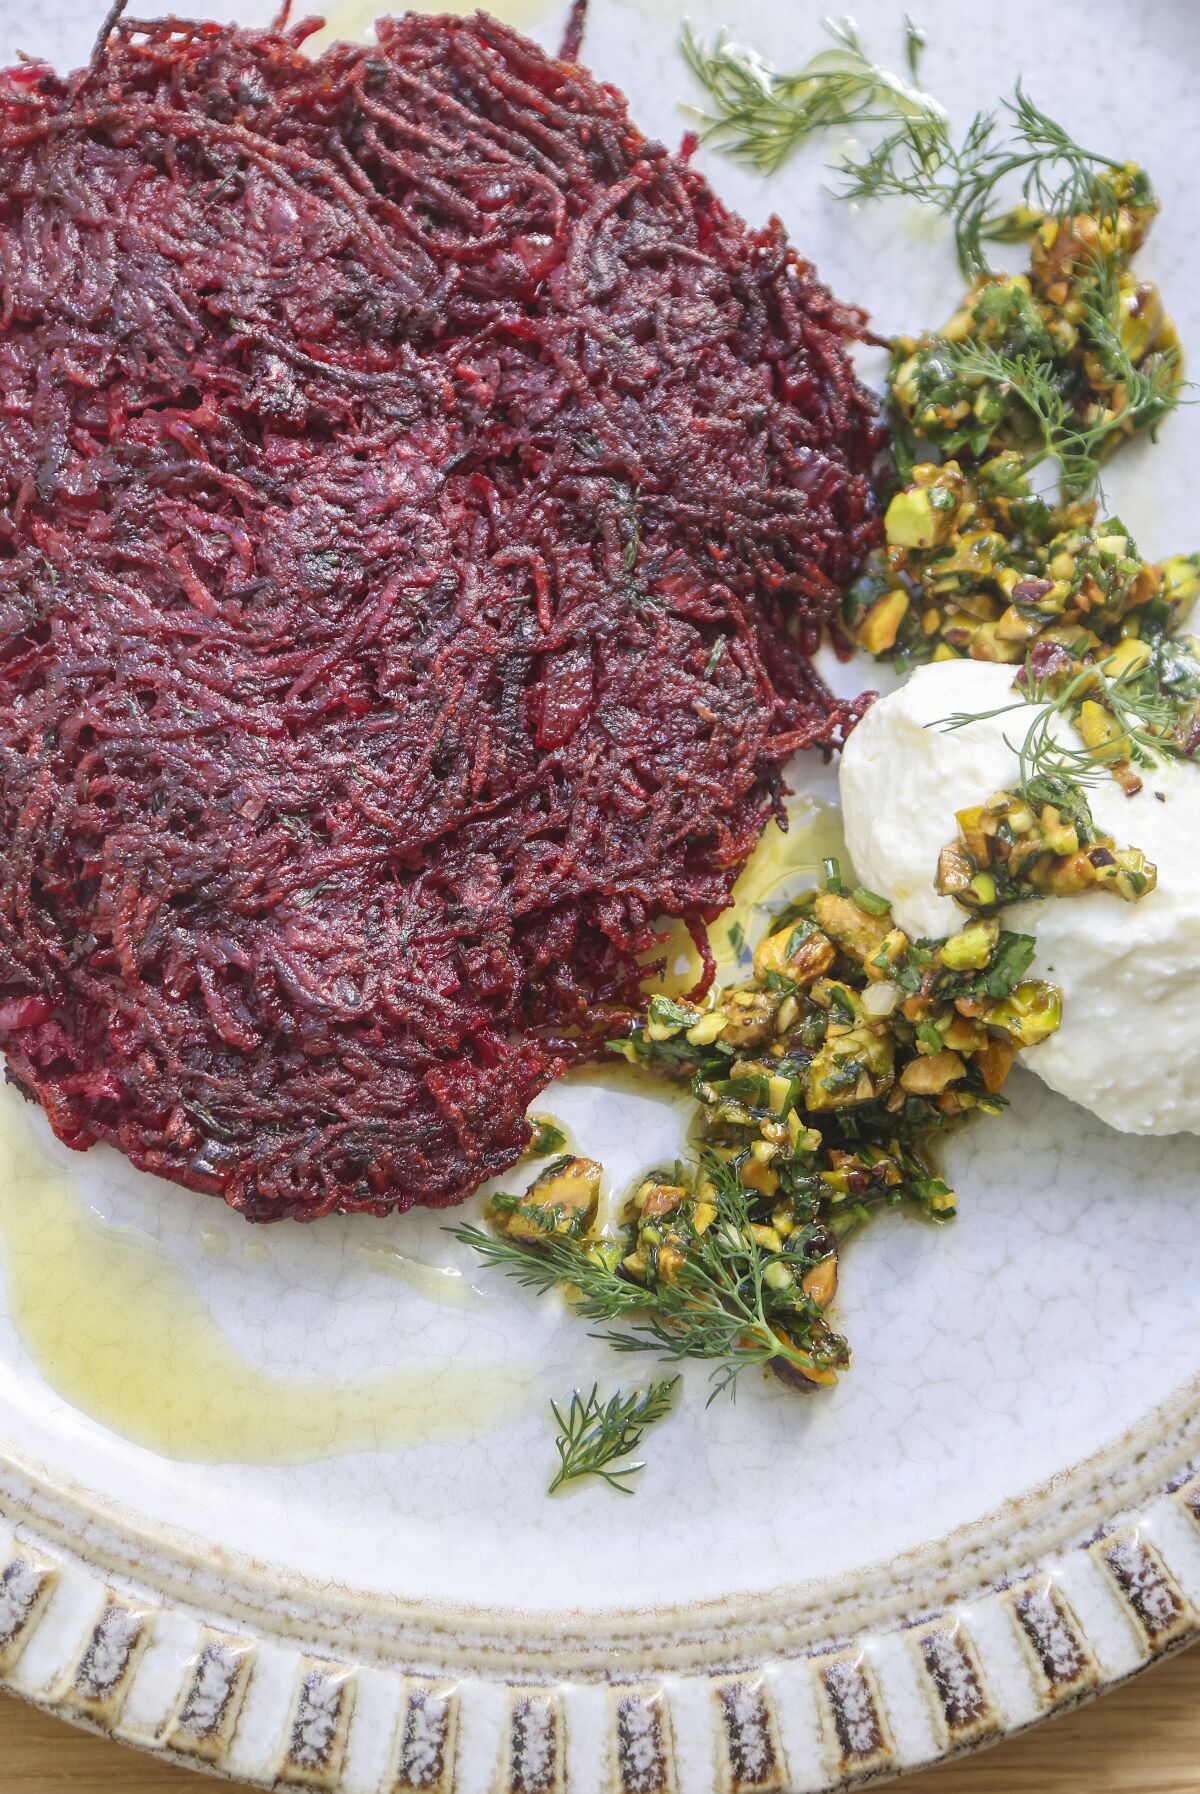 Red beet latkes with whipped feta and pistachio gremolata